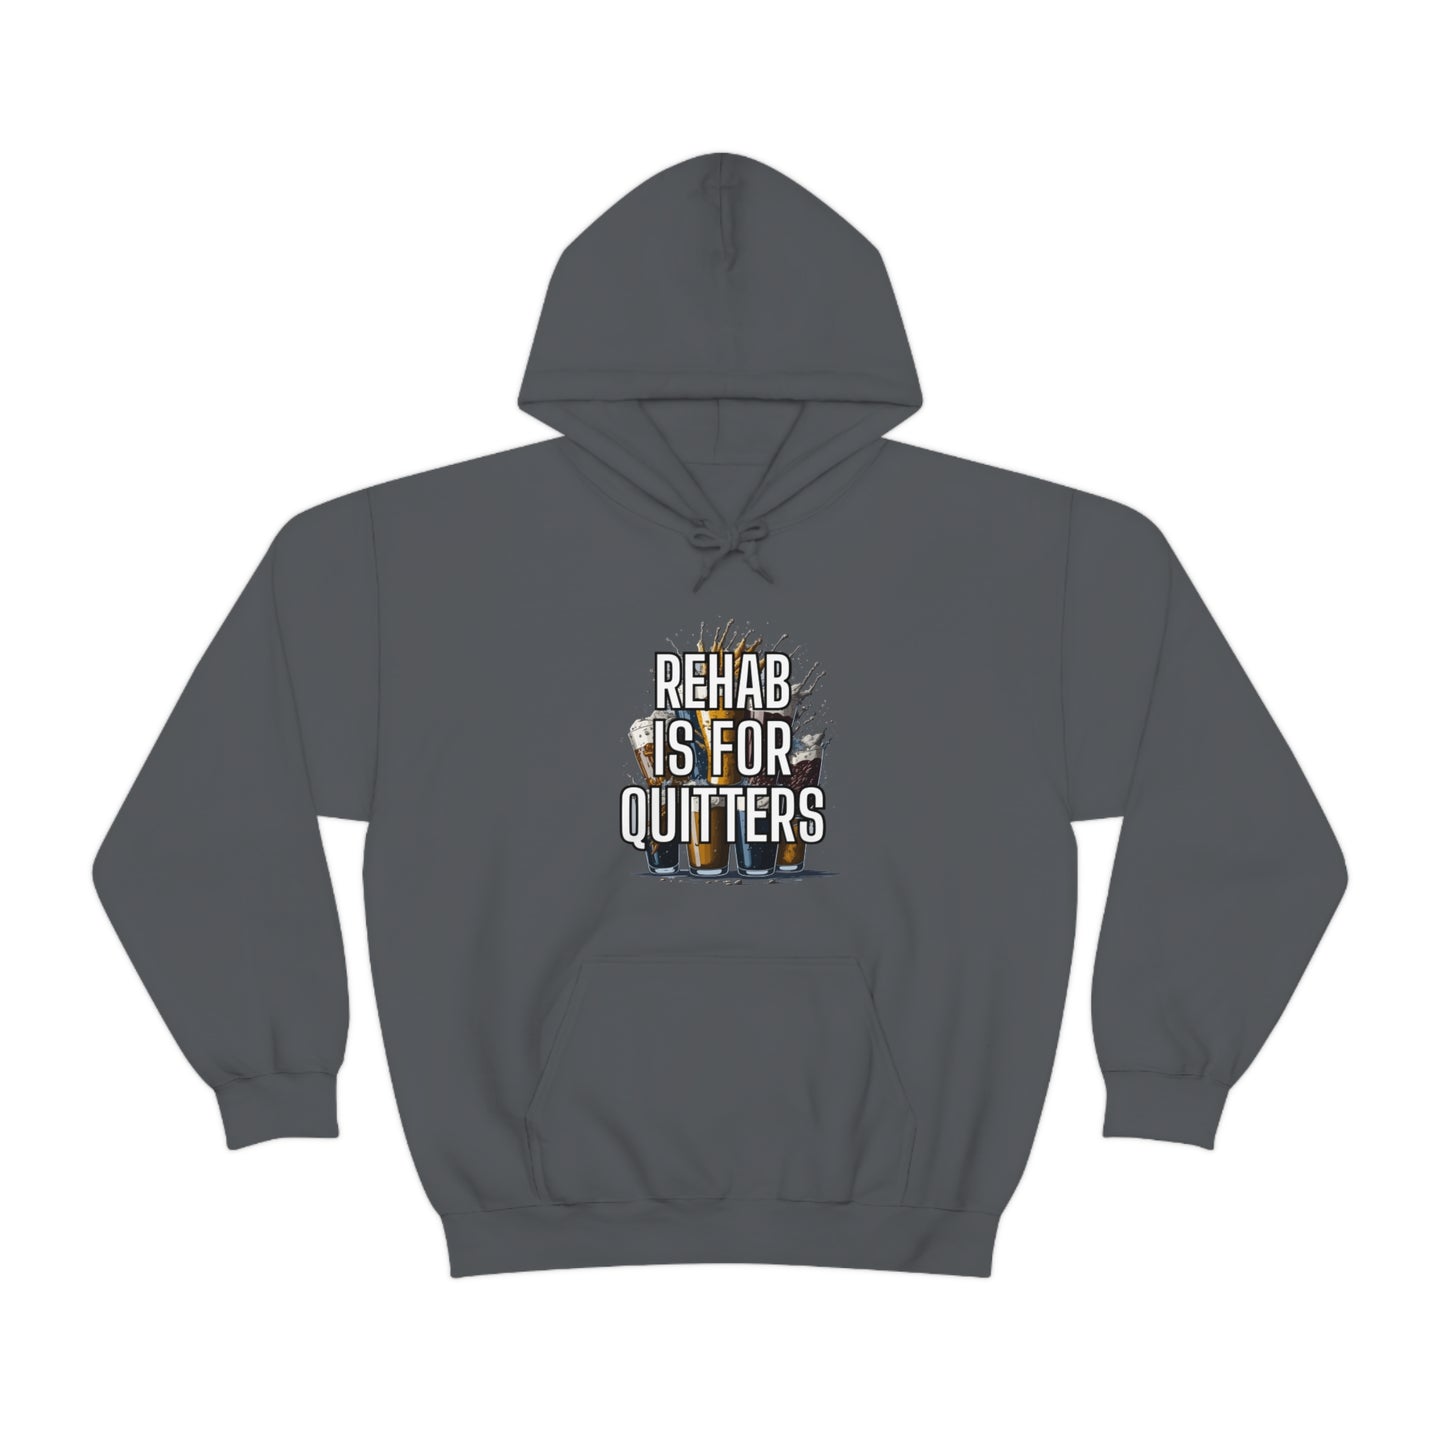 "Rehab Is For Quitters" Hoodie